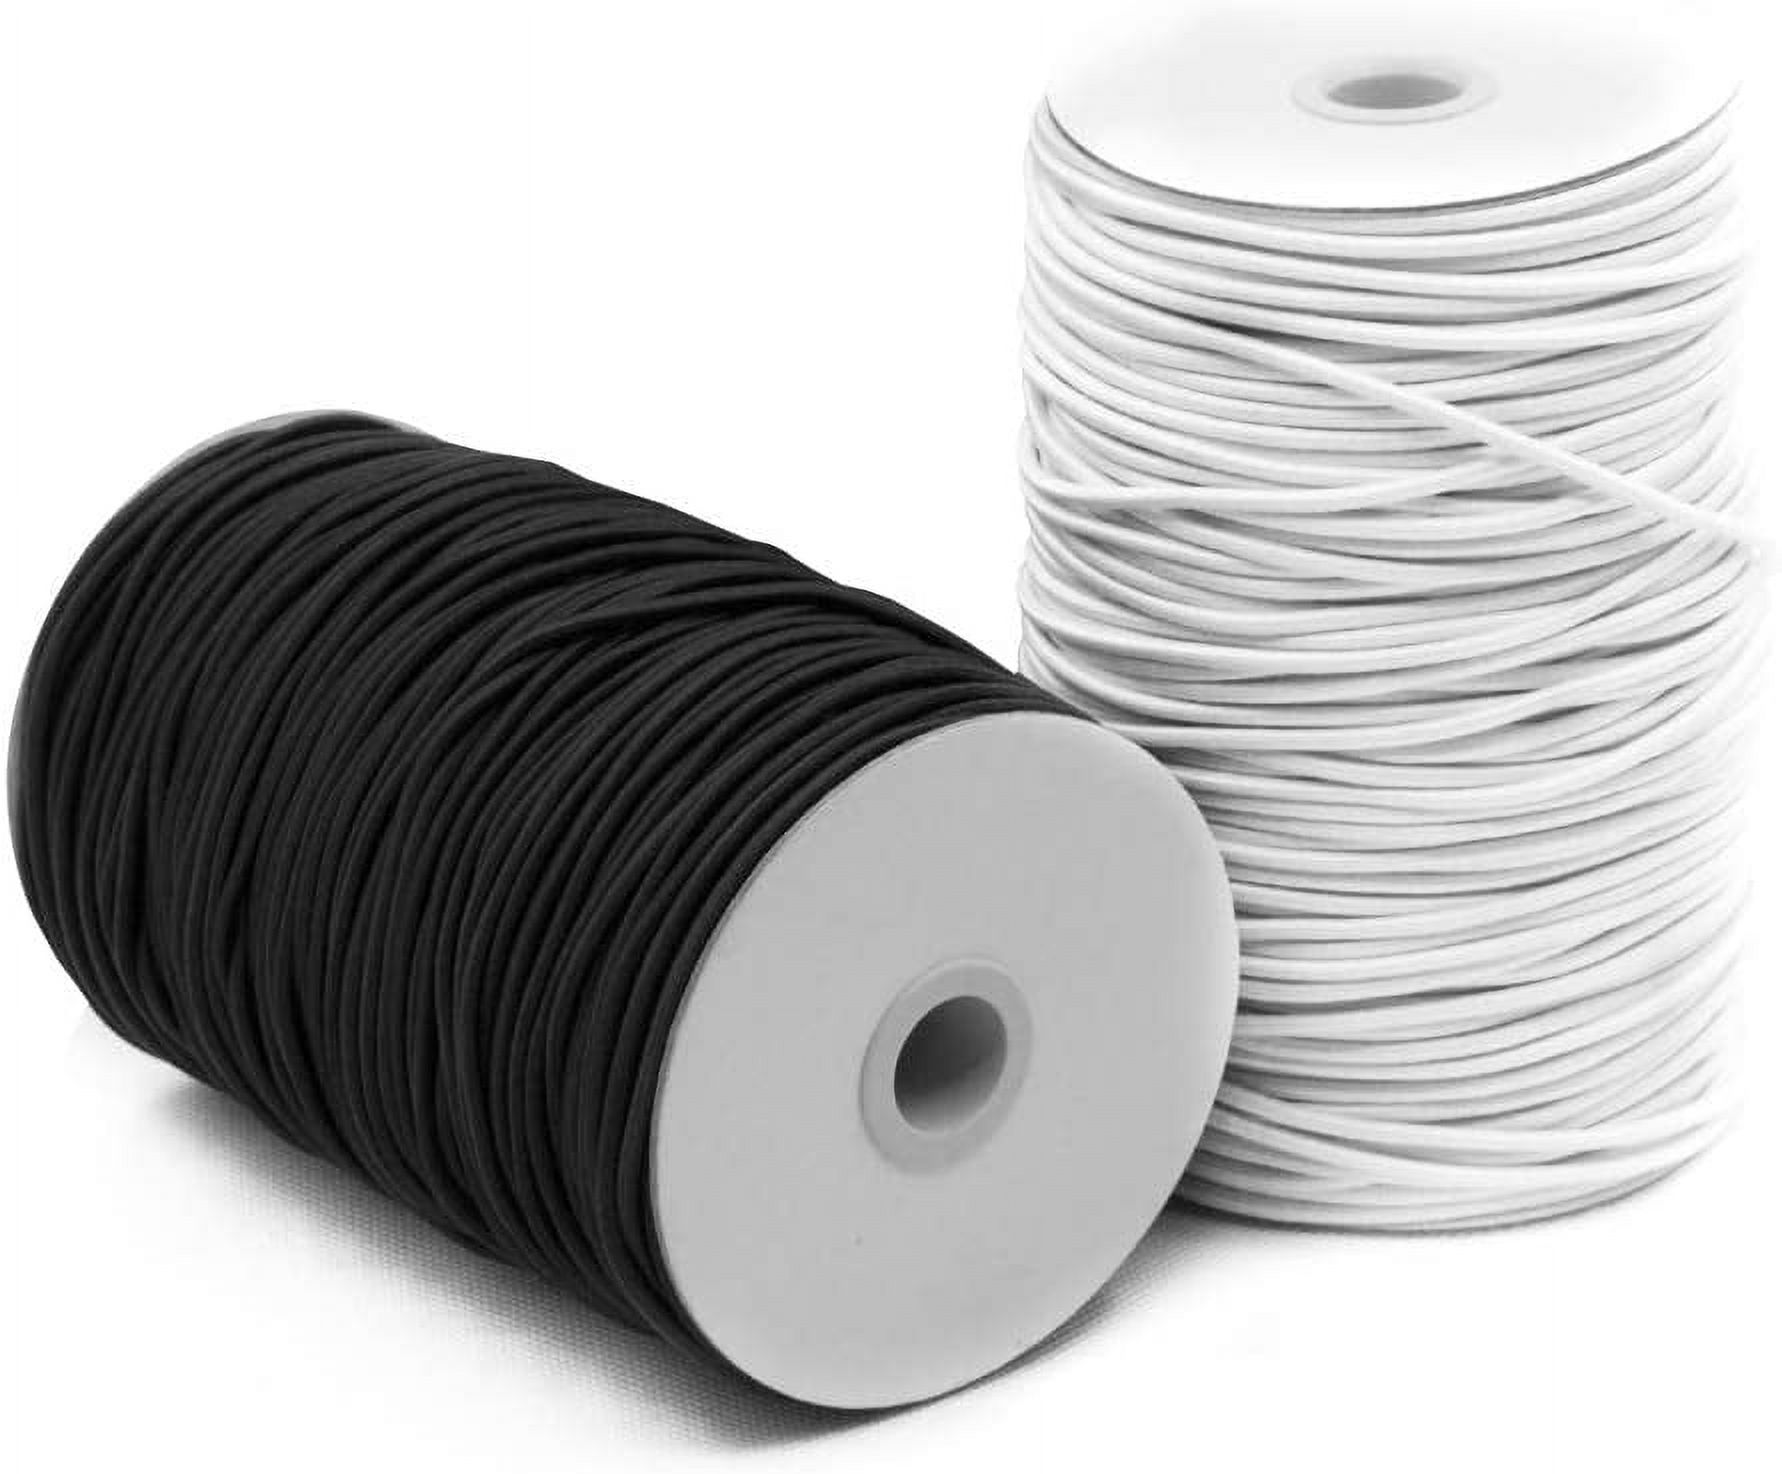 2 Pack 2 mm 5/64 Inch Elastic Cord Stretch String, SourceTon Elastic  Beading Cord (Black & White, 55 Yard), Great for Crafts, Hair Ties and Home  Uses 